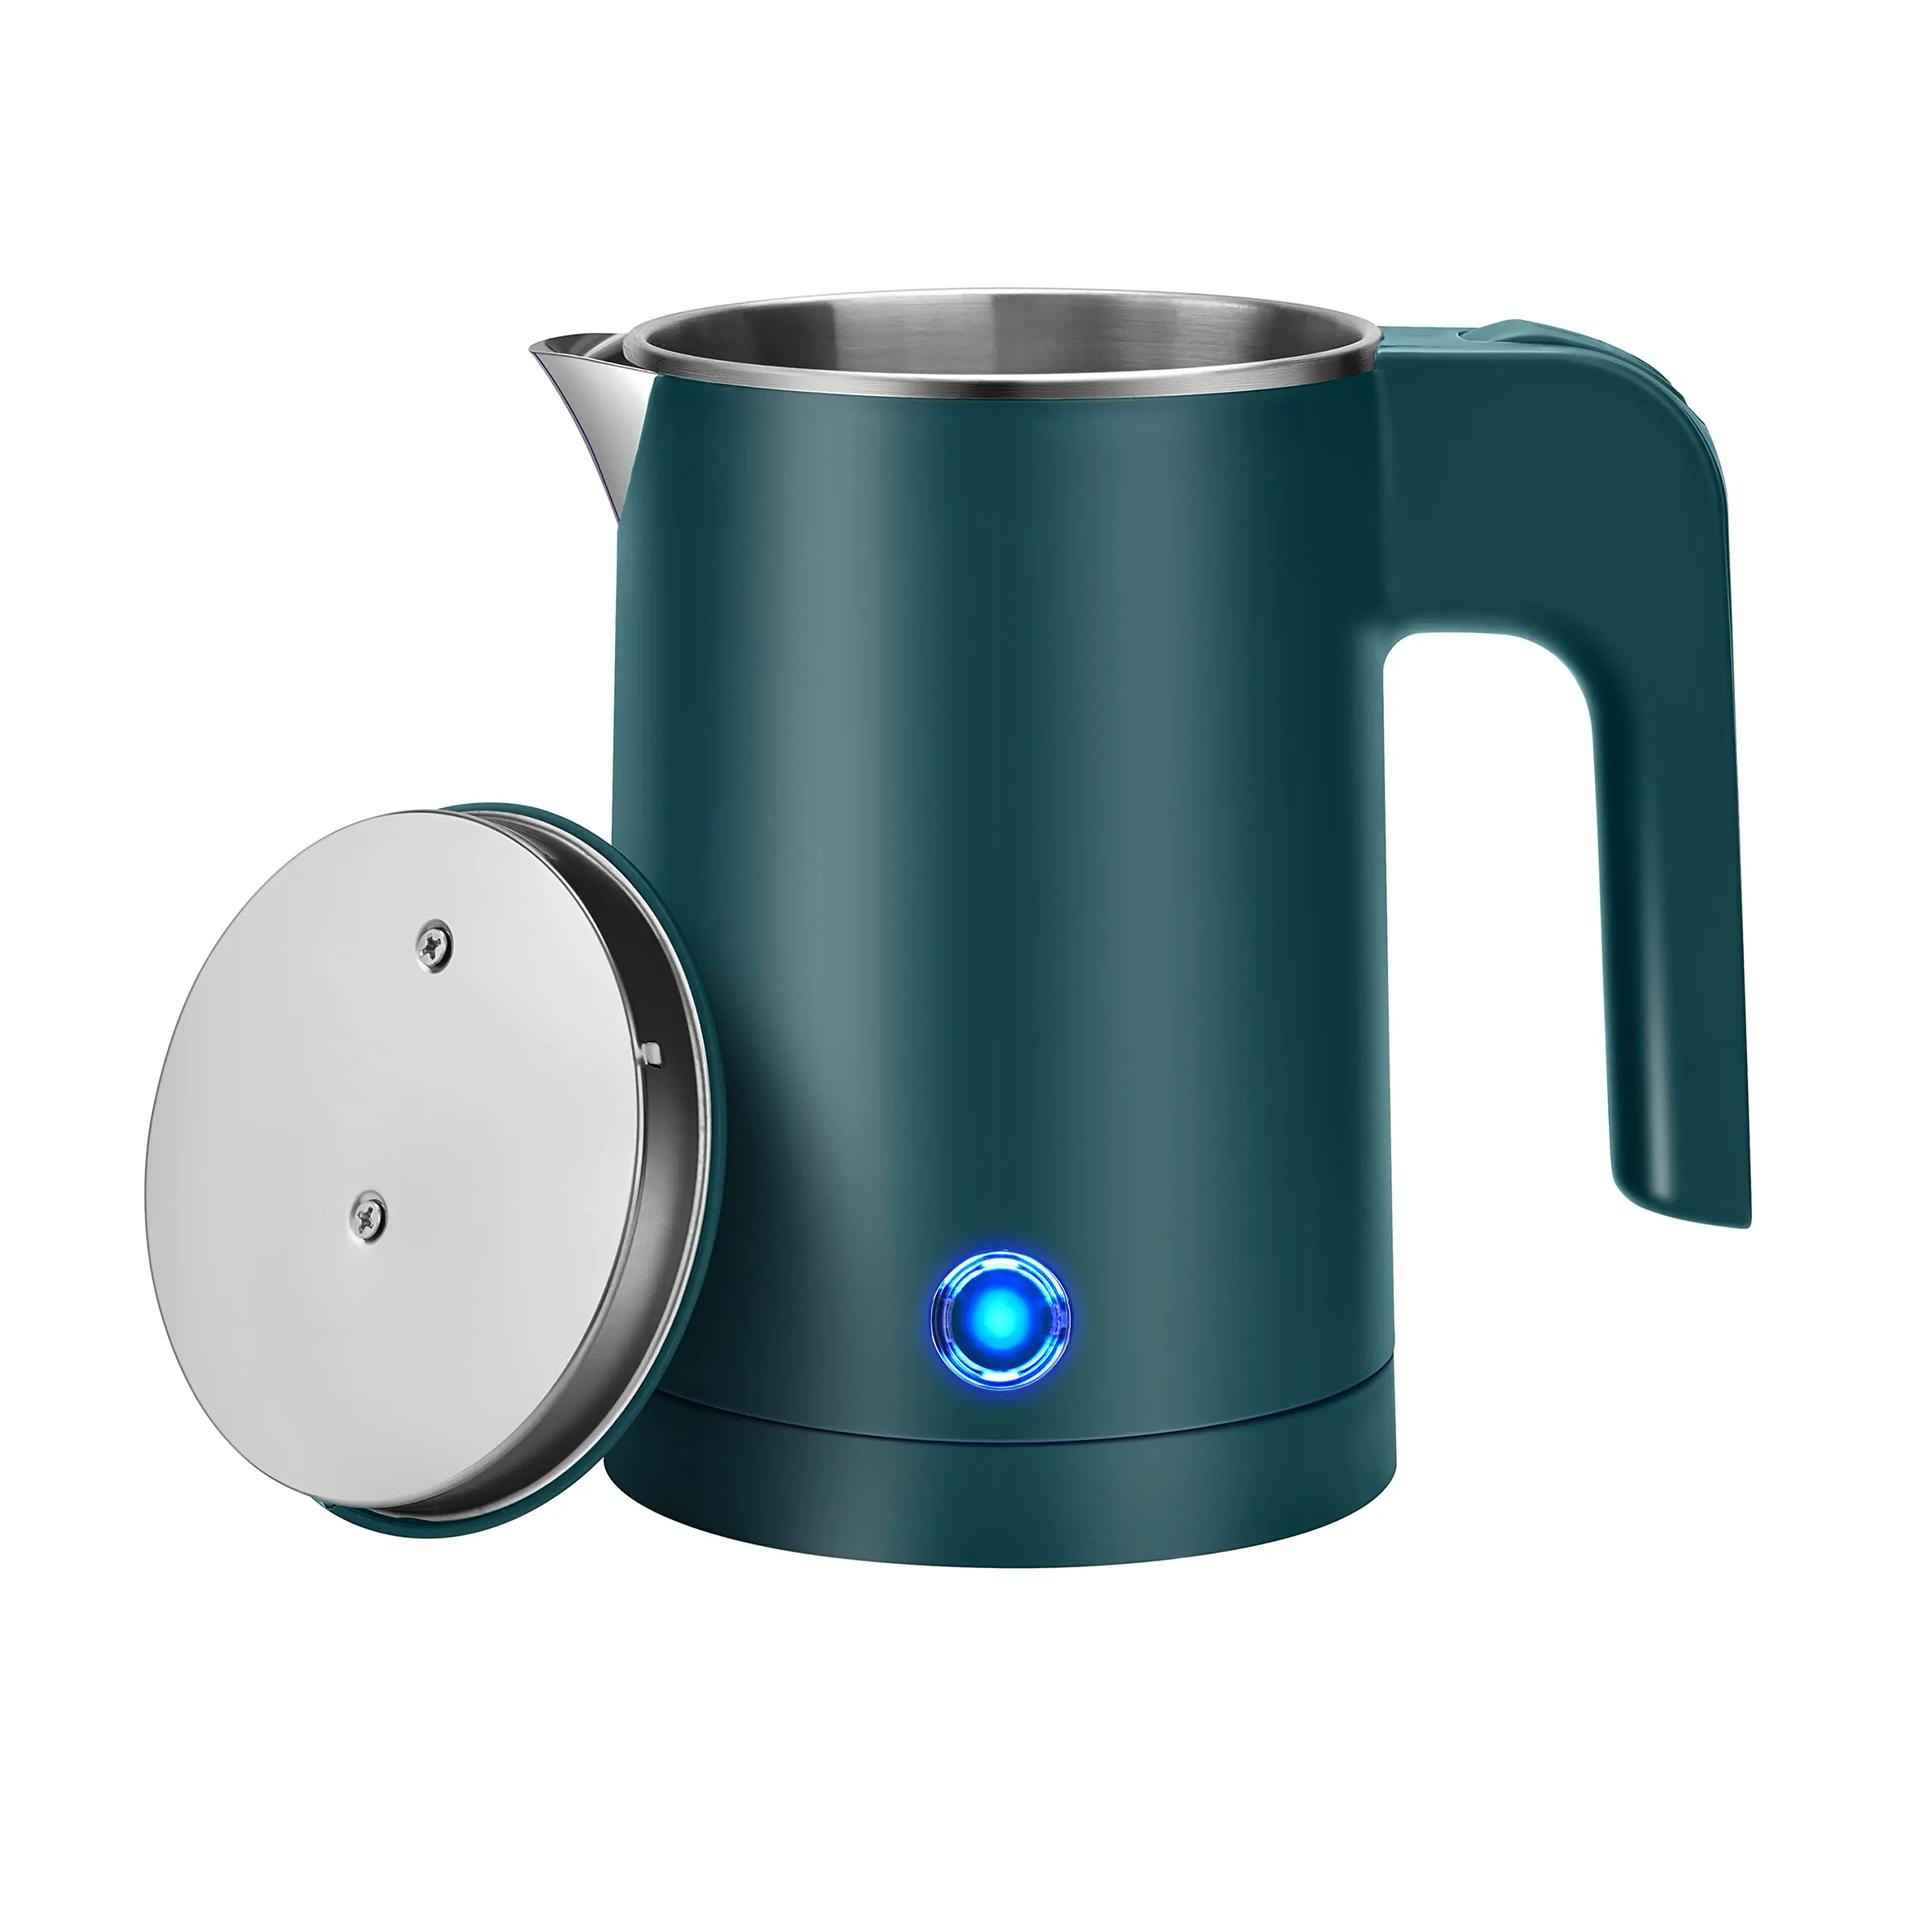 small electric jug kettle - Is there a 12v kettle